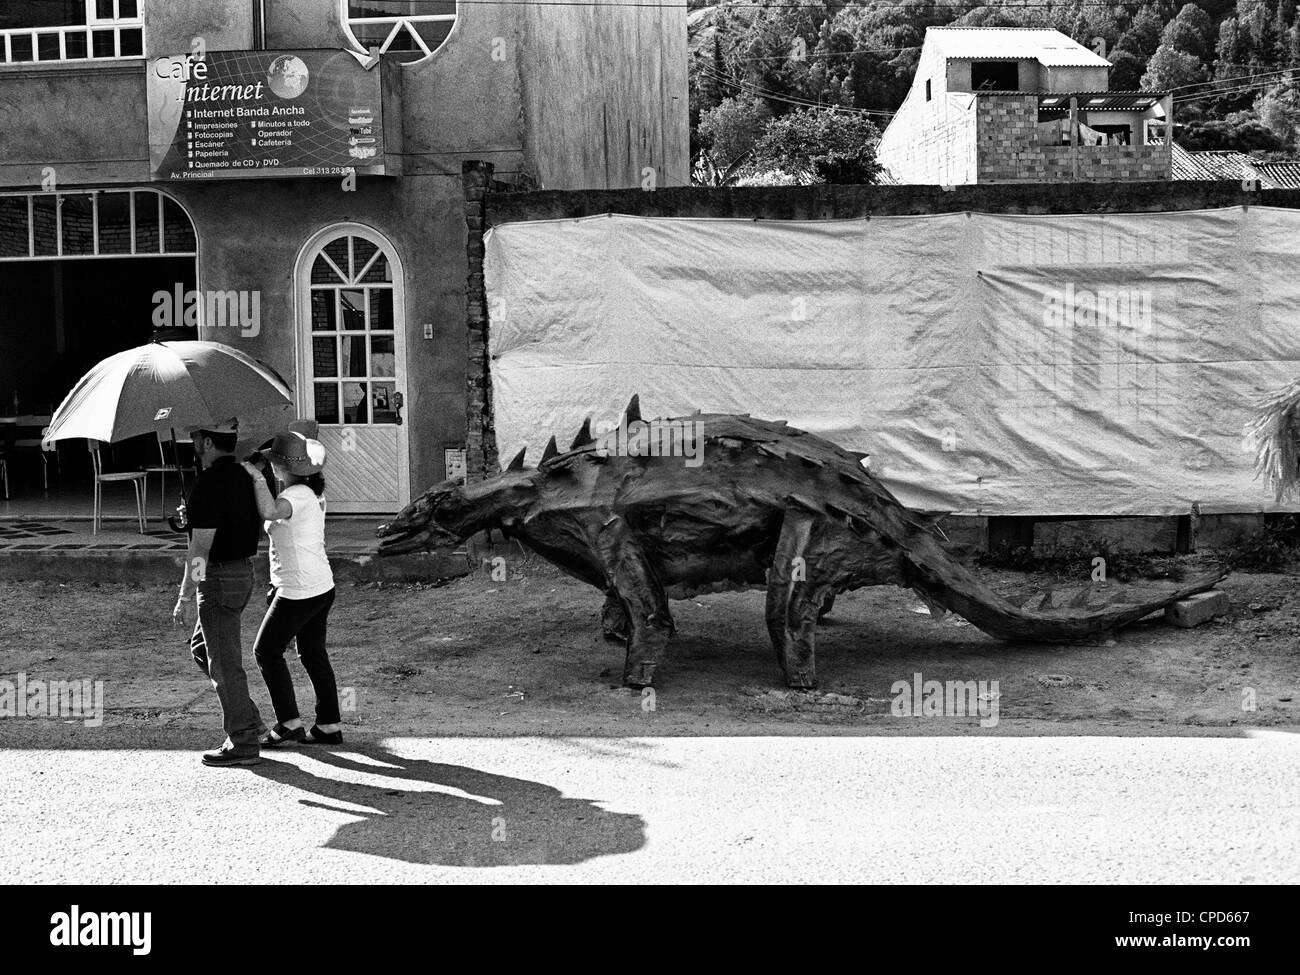 Couple in the street with an umbrella walking by a dinosaur's model. Sutamarchan, Boyacá, Colombia, South America, Andes Stock Photo